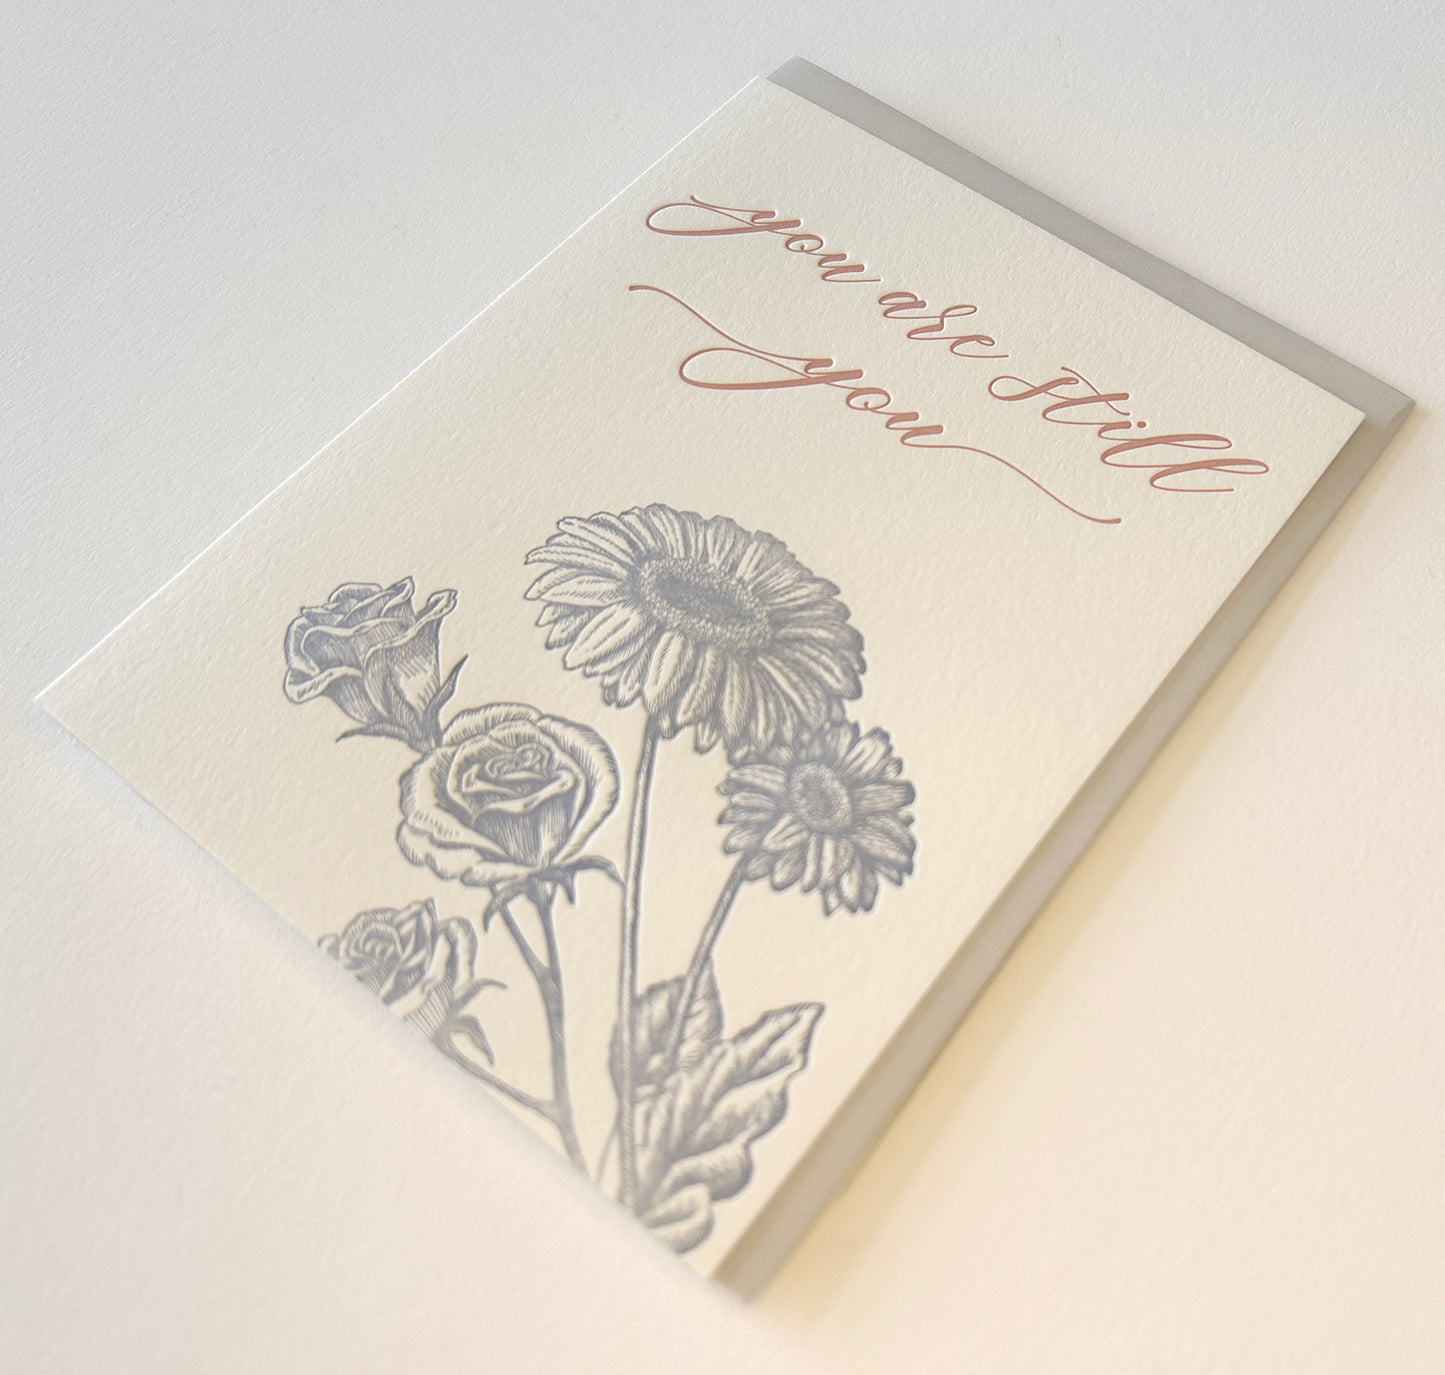 You Are Still You - Encouragement Greeting Card